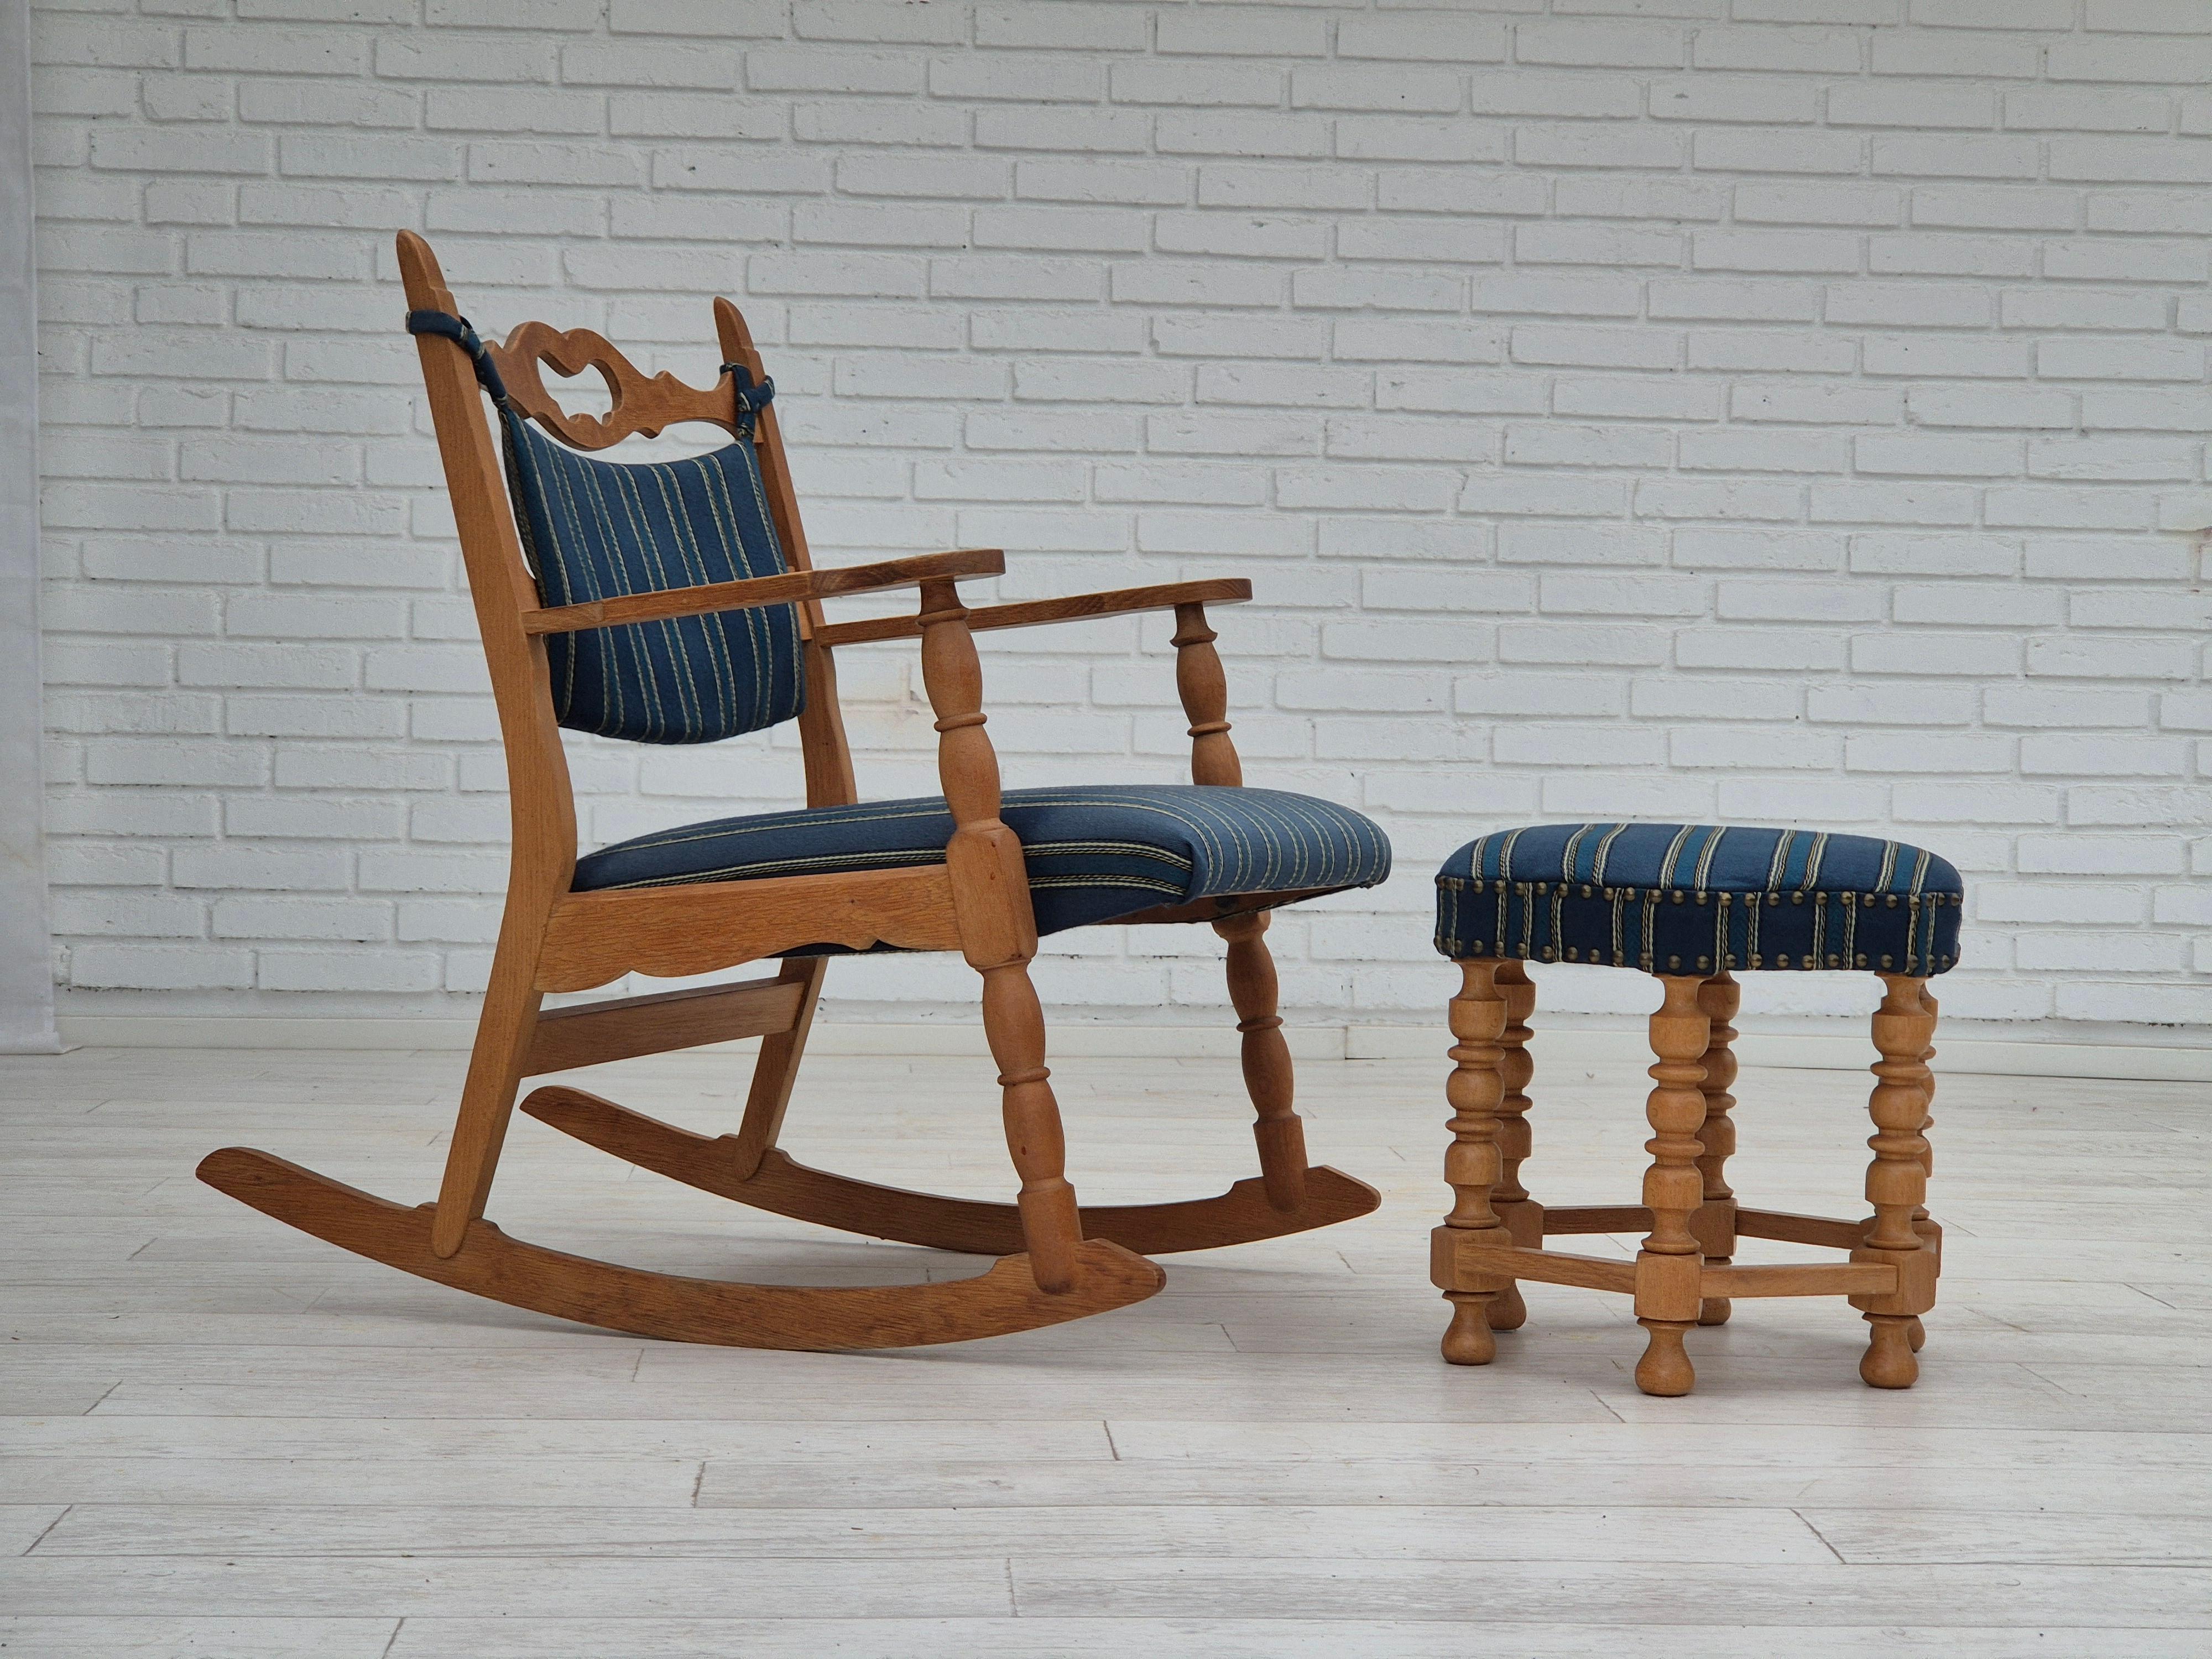 1970s, Danish rocking chair with footstool. Original very good condition: no smells and no stains. Oak wood, blue furniture wool. Manufactured by Danish furniture manufacturer in about 1965-70s.